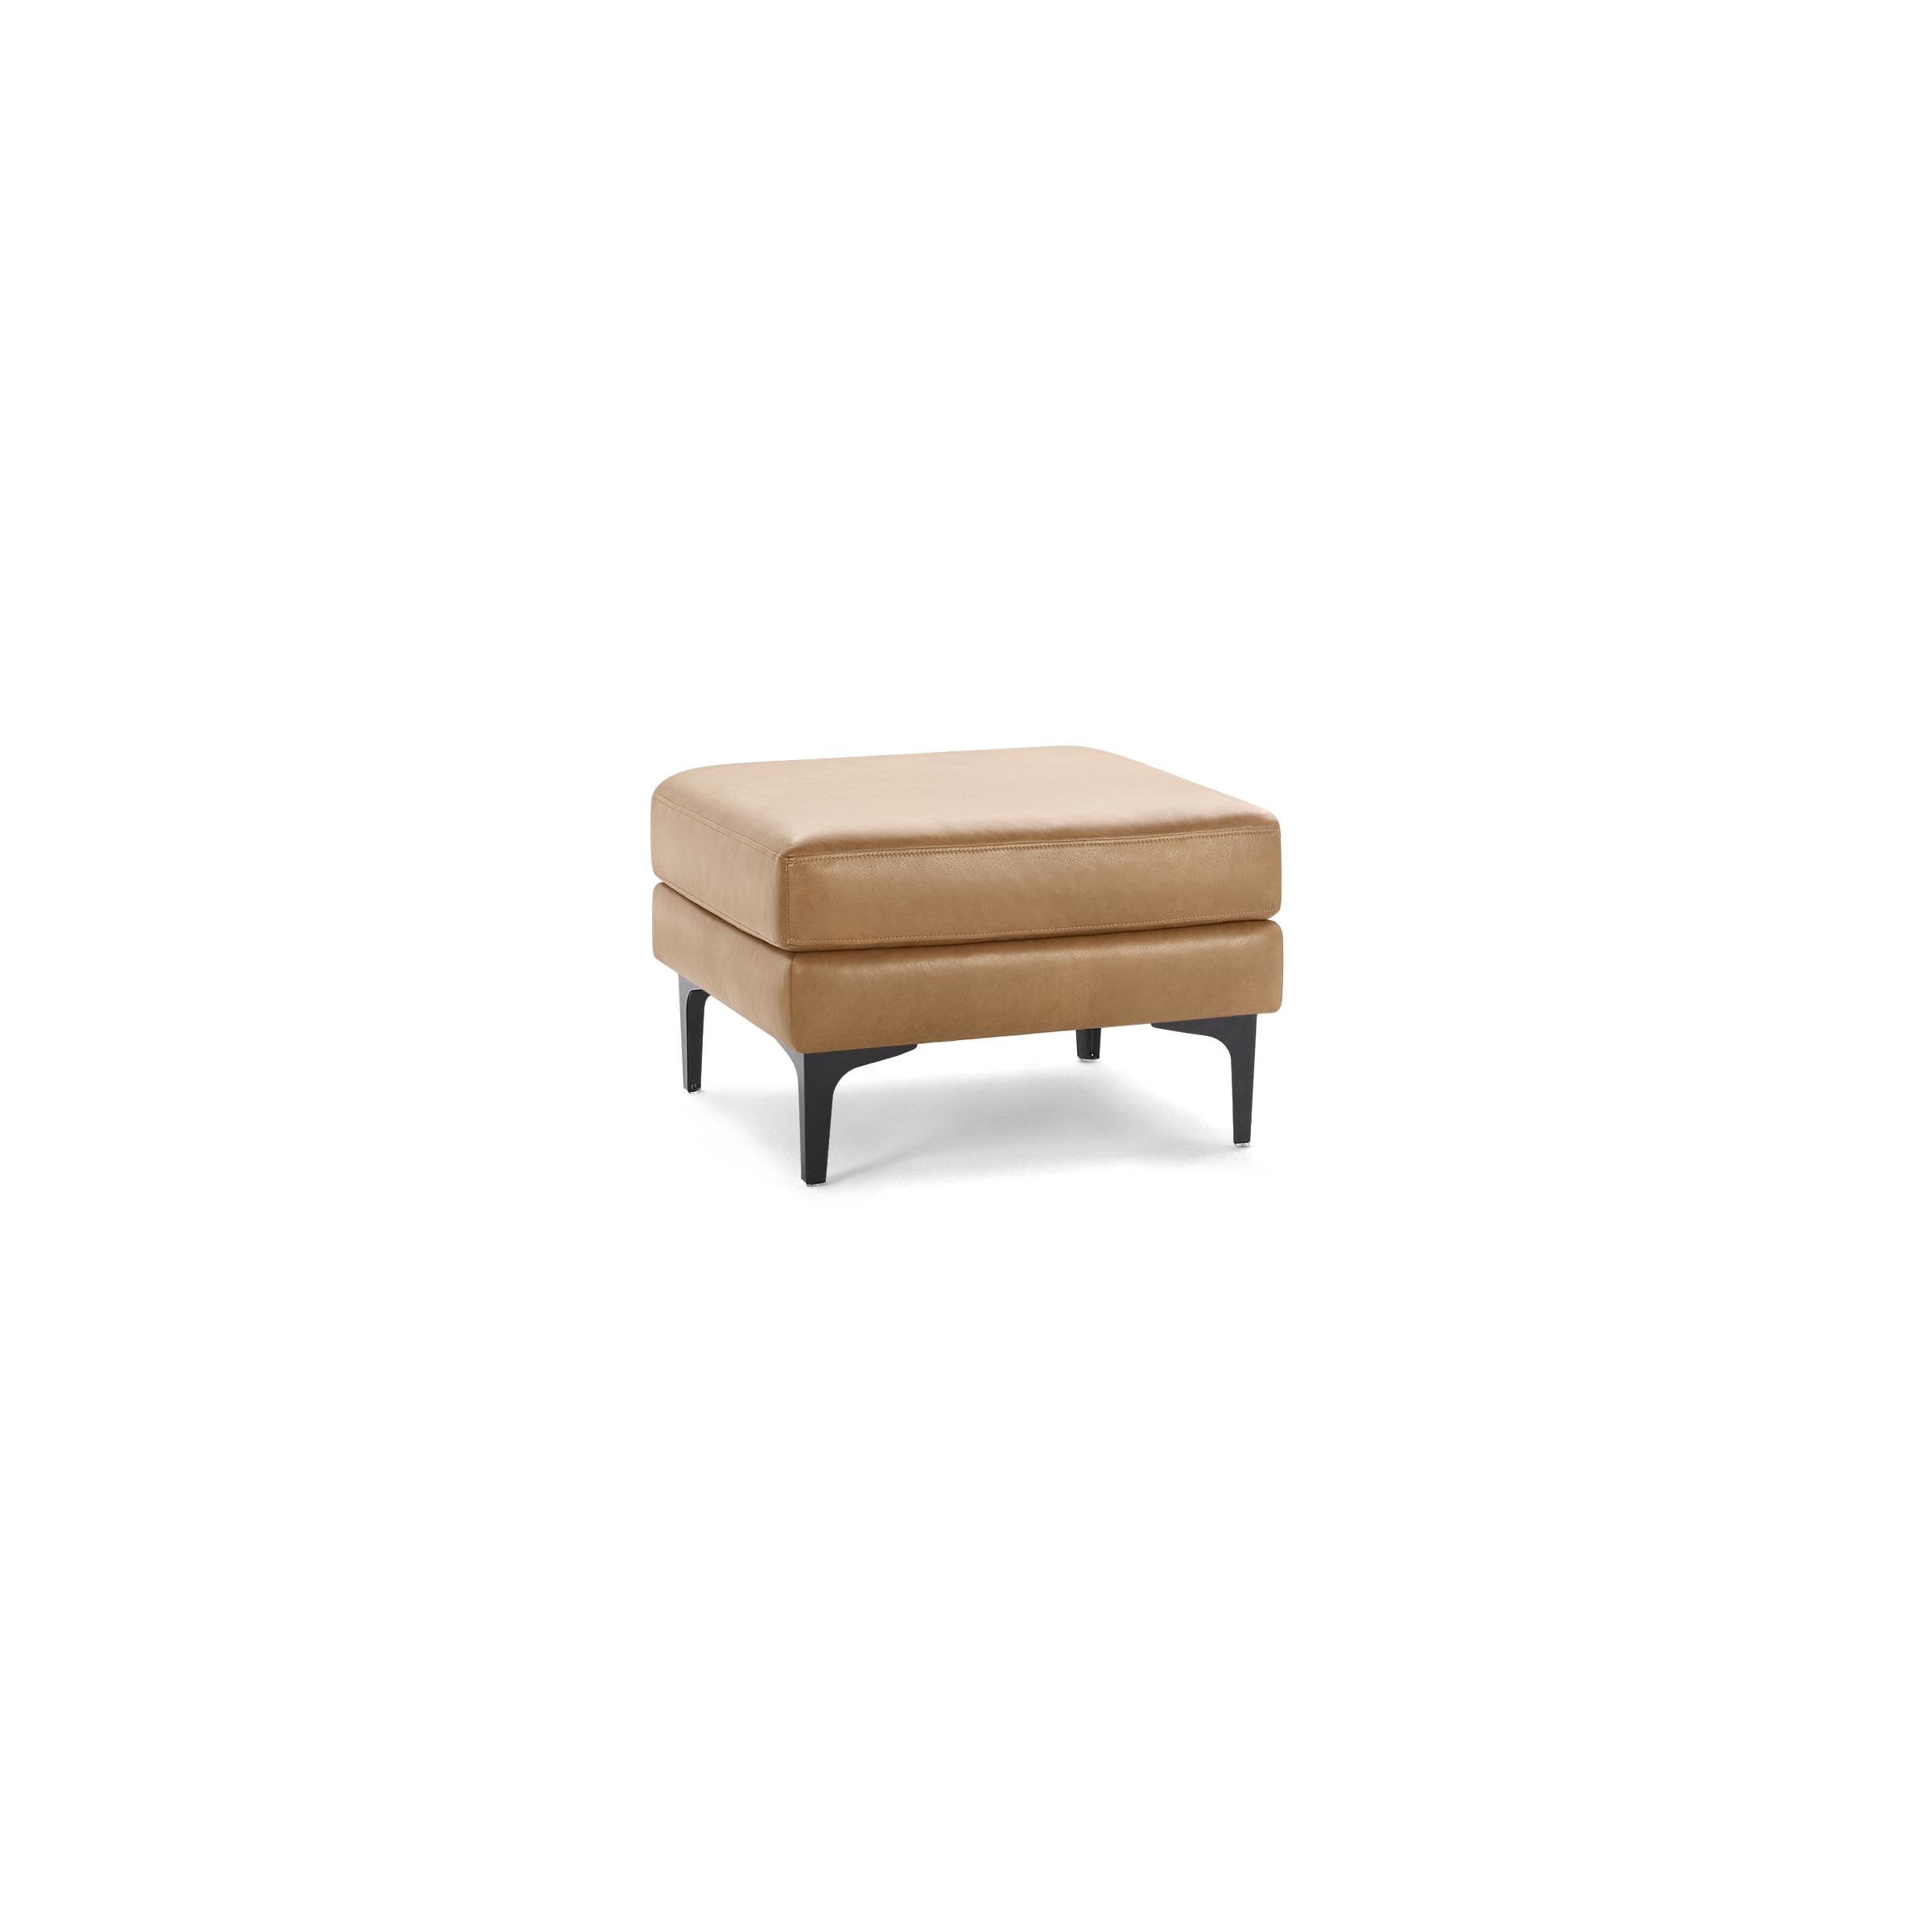 Nomad Leather Ottoman in Camel, Black Metal Legs - Image 0